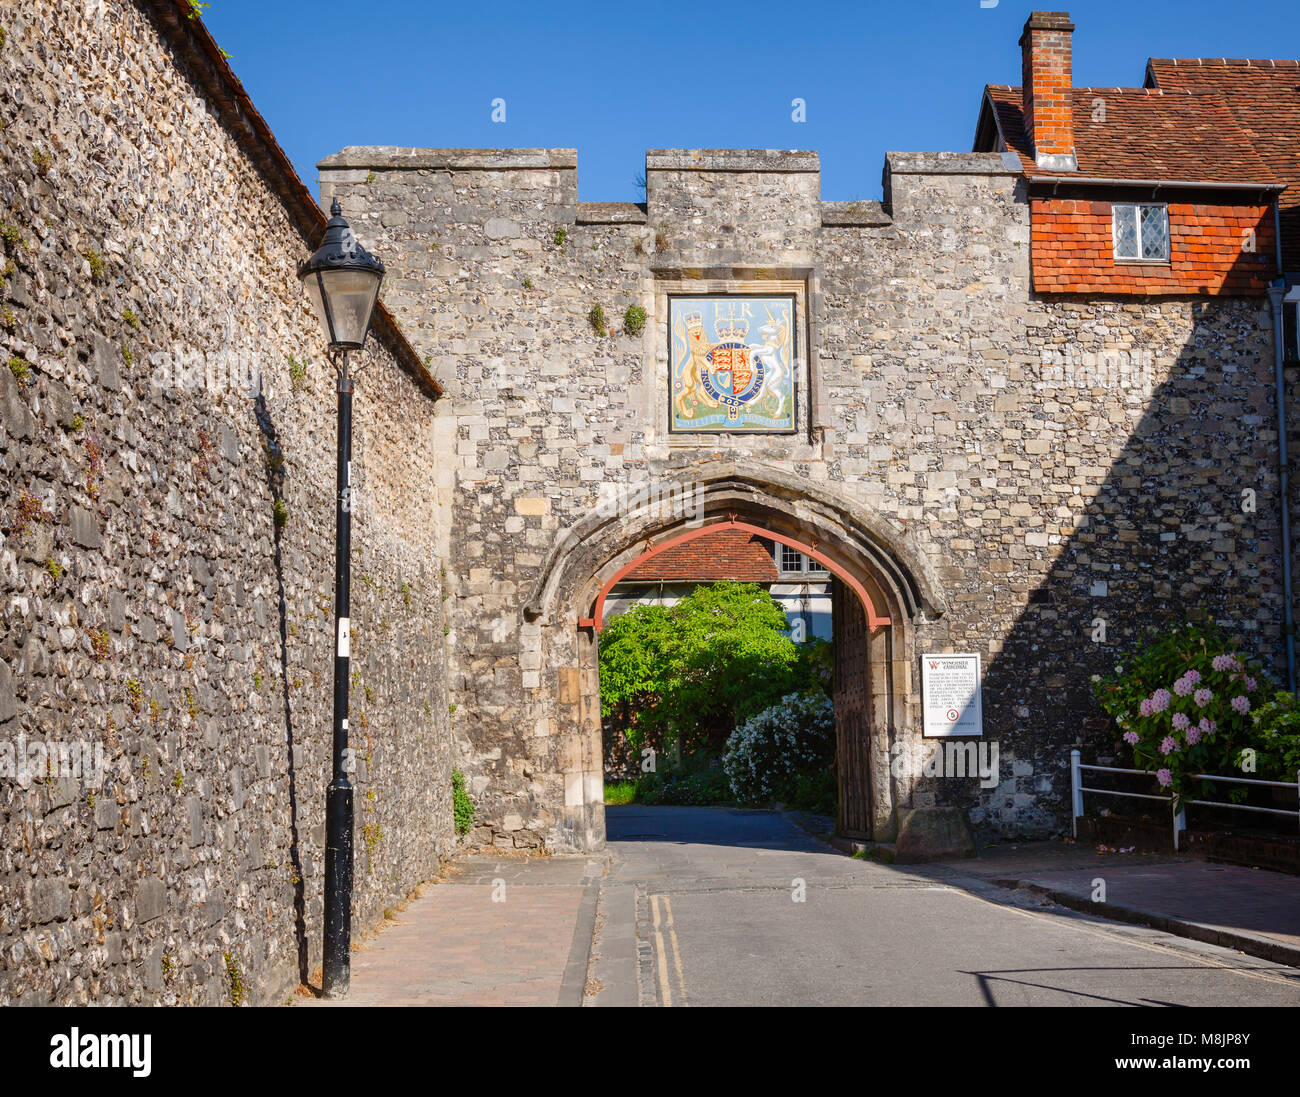 Priory Gate entrance to Winchester Cathedral featuring City Coat of Arms and parking restriction notice, Hampshire, South East England, UK Stock Photo